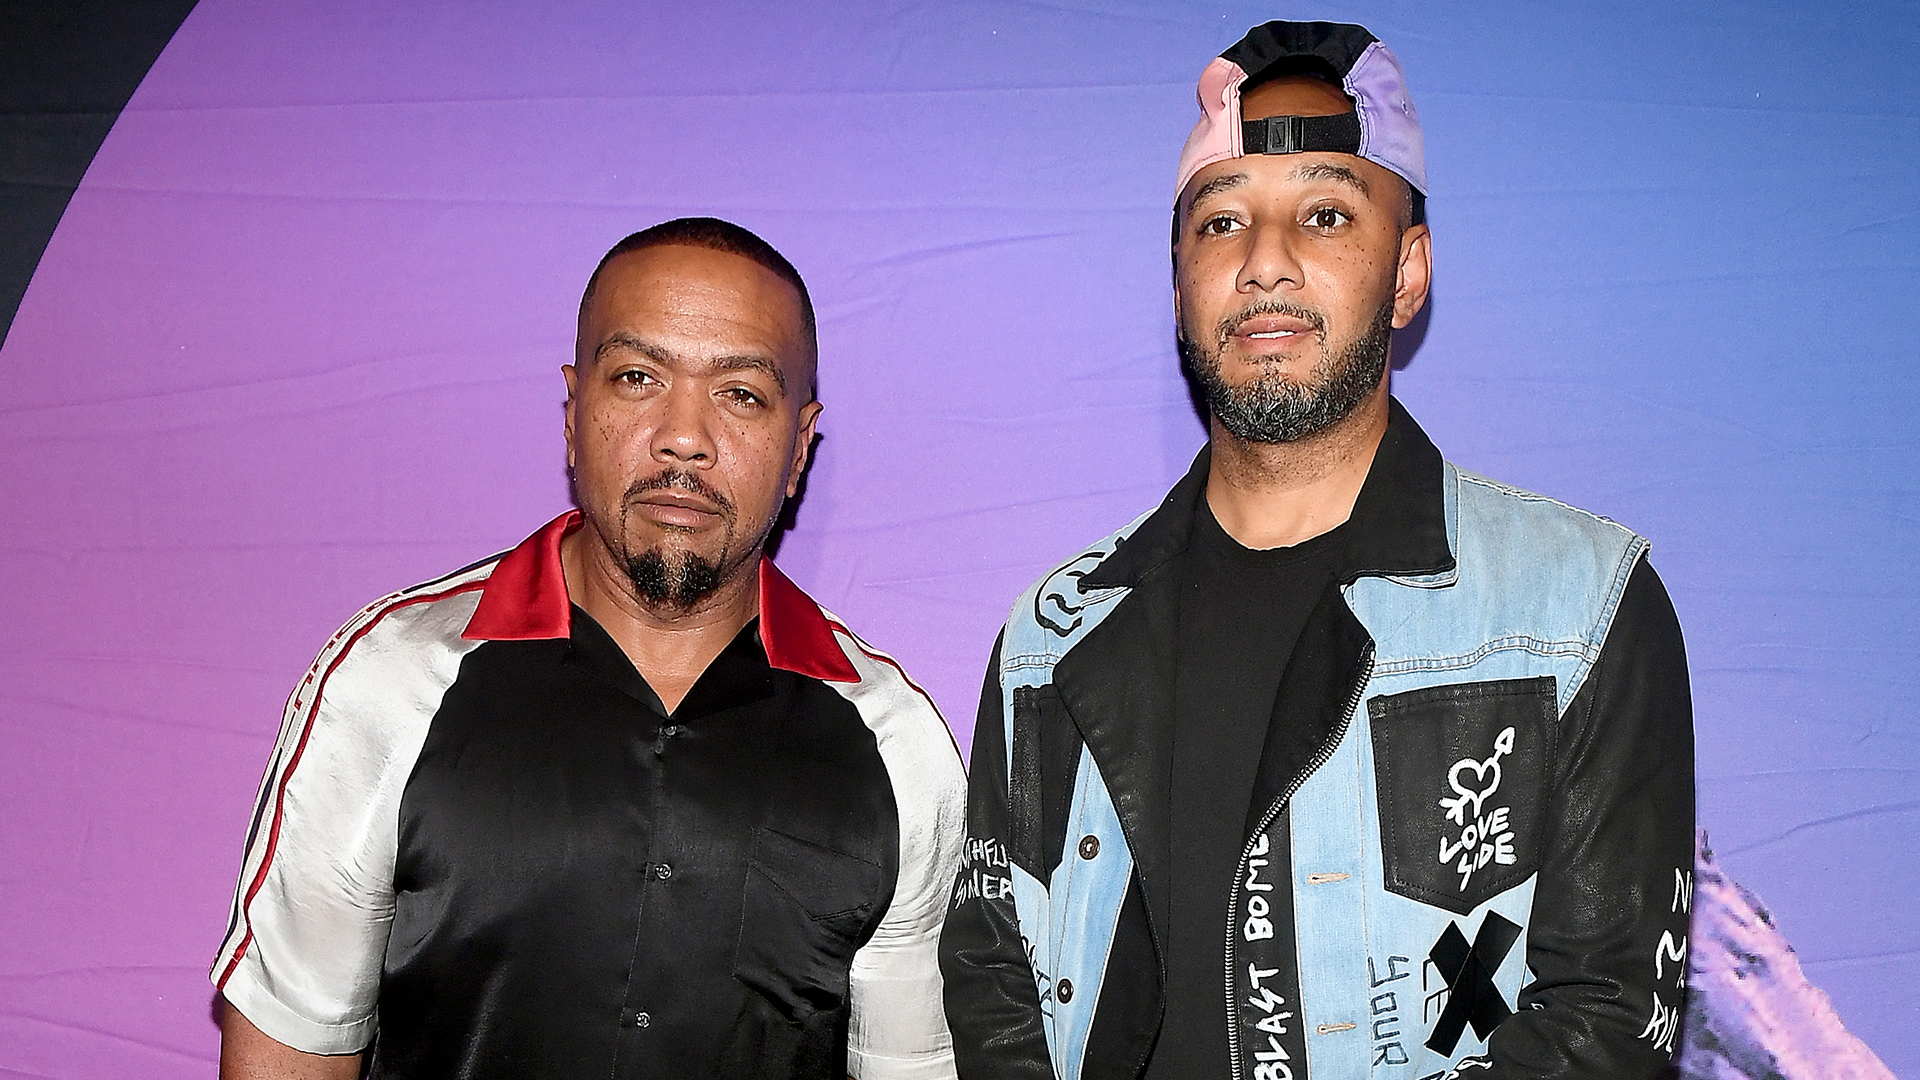 TrillerVerz: Swizz Beatz And Timbaland Announce The 'Biggest Creative IPO Of All Time'